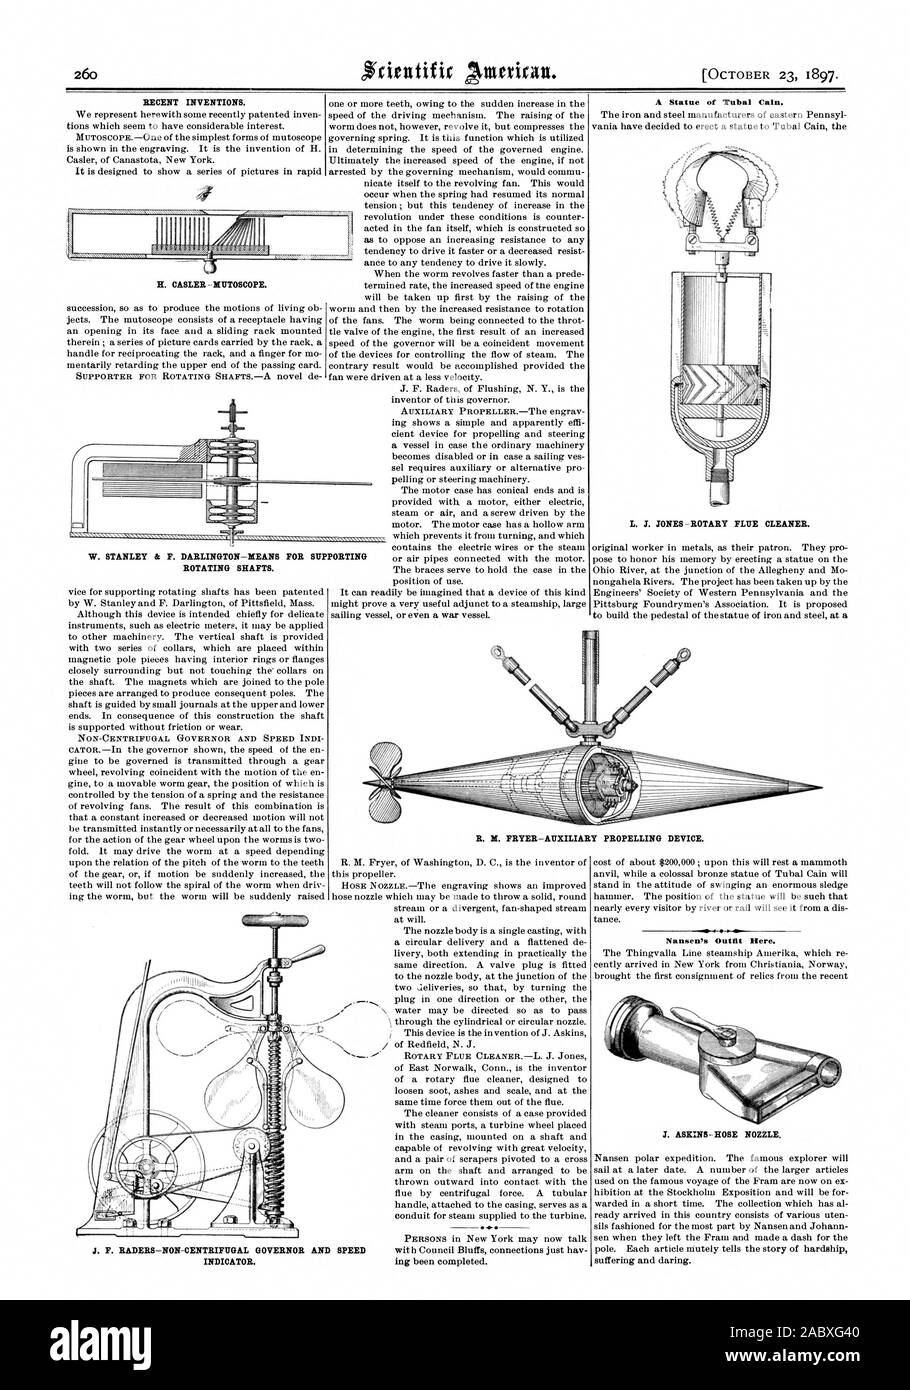 RECENT INVENTIONS. H. CASLER - MUTOSCOPE. W. STANLEY & F. DARLINGTON—MEANS FOR SUPPORTING ROTATING SHAFTS. INDICATOR., scientific american, 1897-10-23 Stock Photo